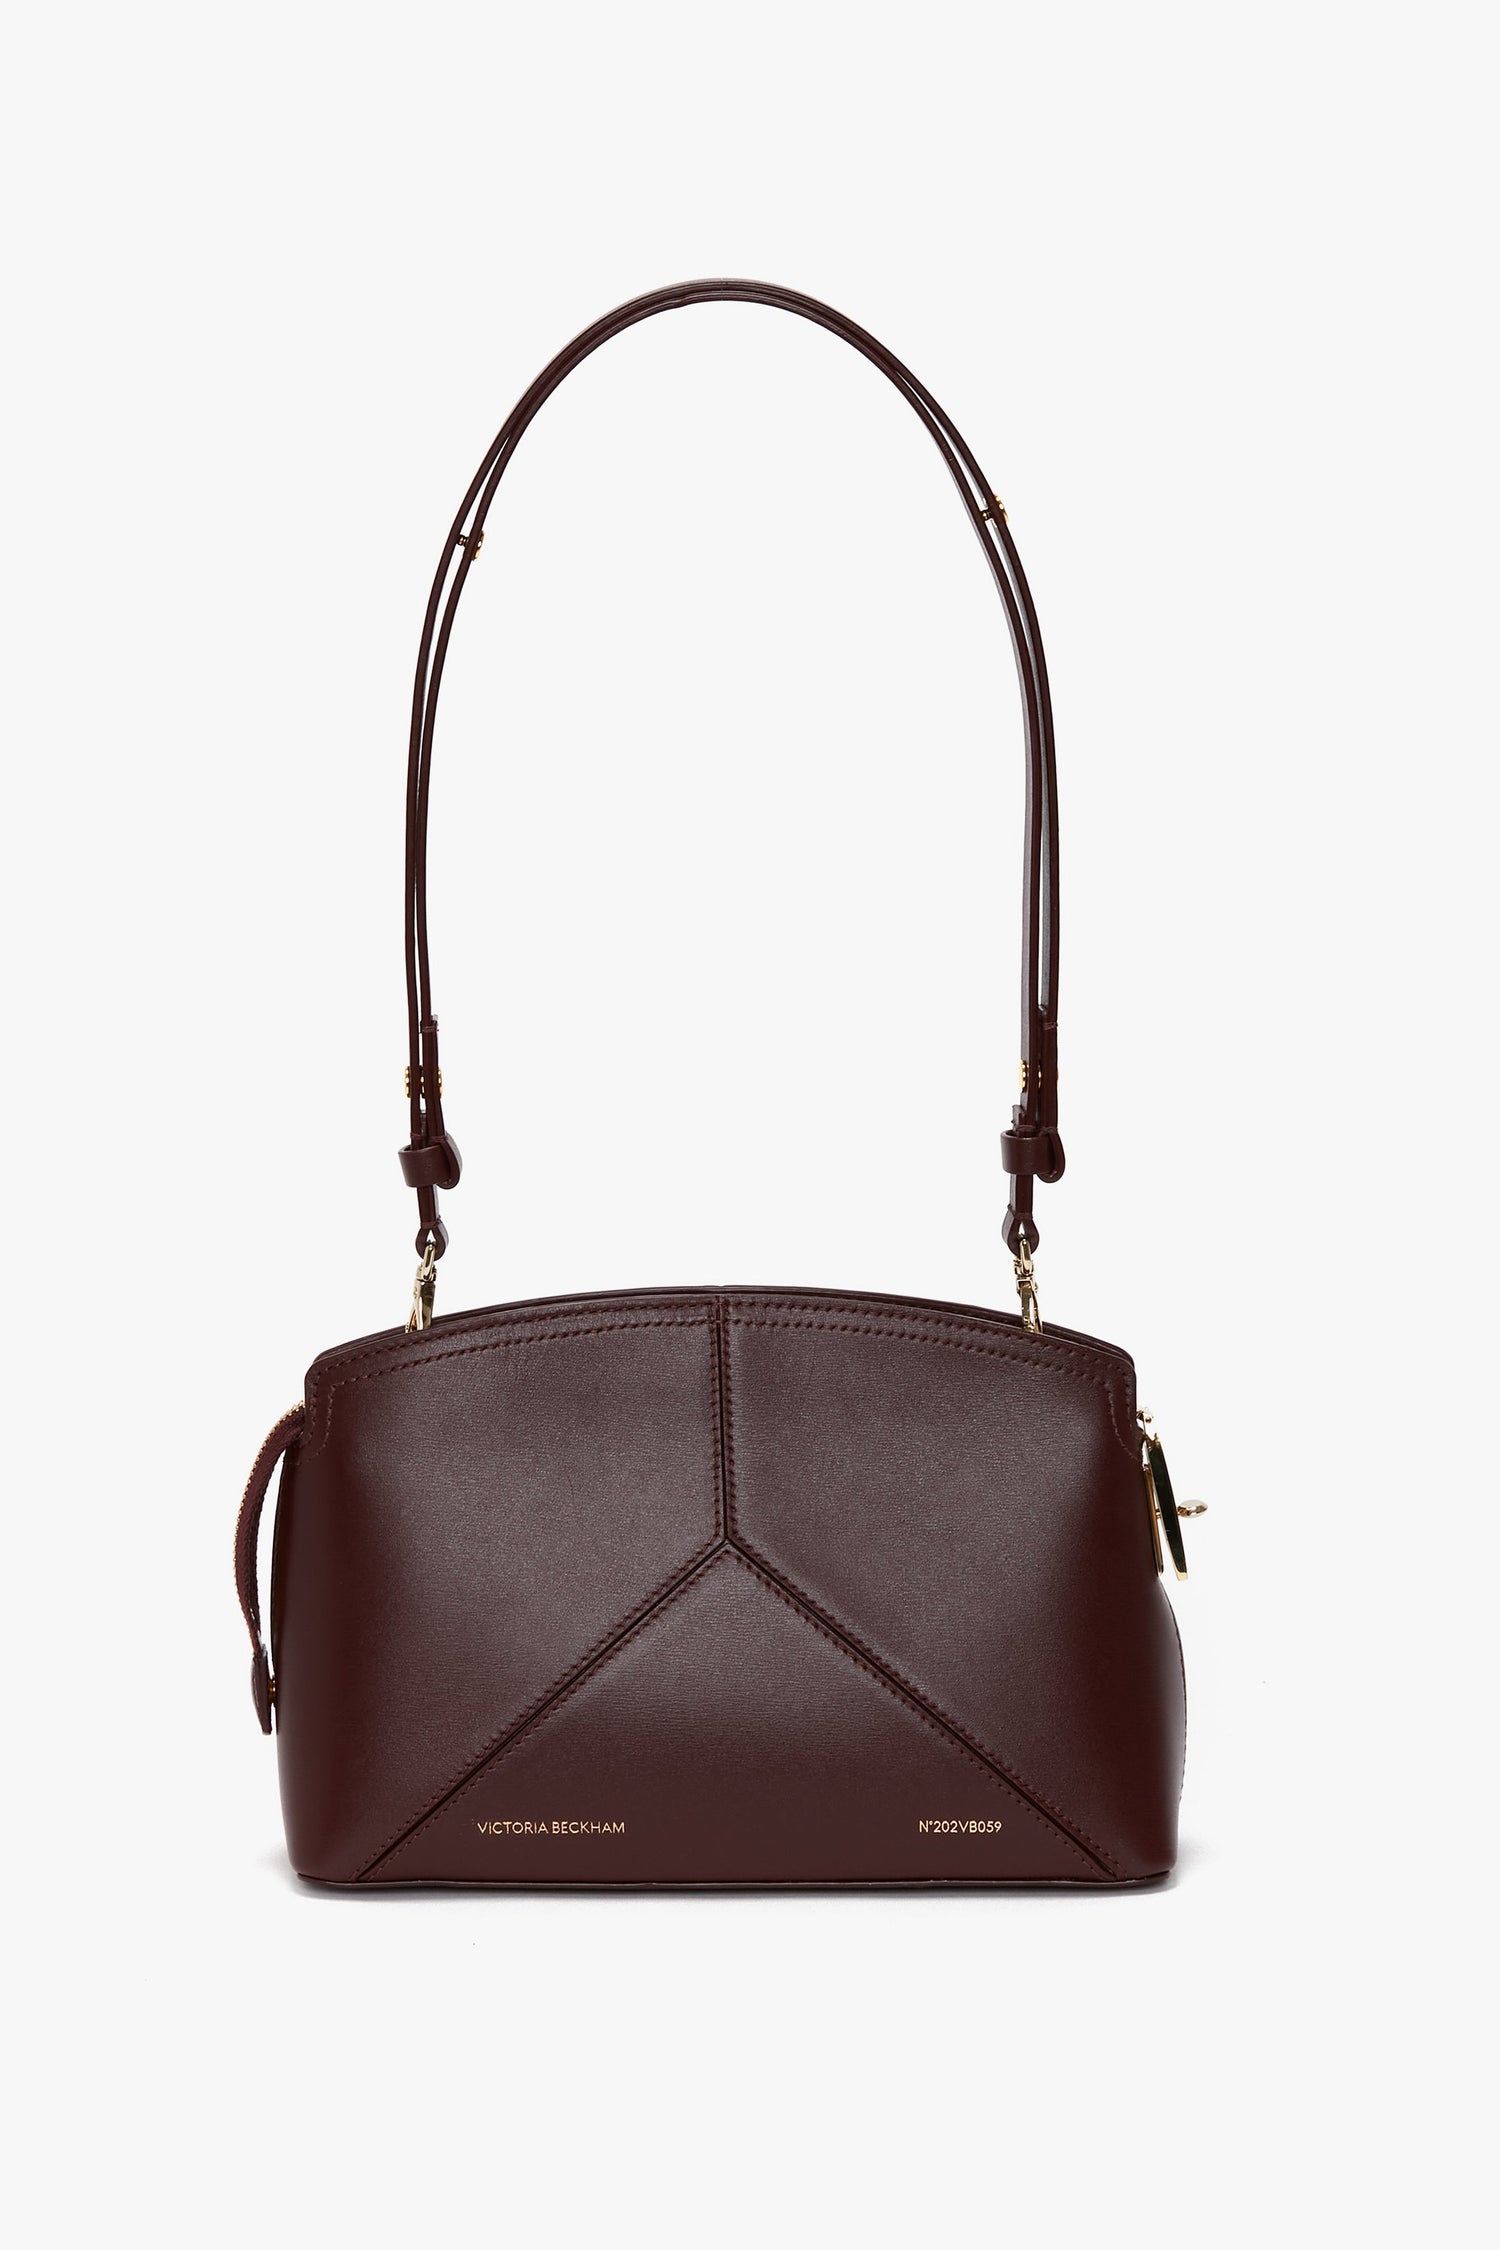 A dark brown textured calf leather handbag with a geometric design and gold-tone hardware, featuring the text "Victoria Beckham" and a padlock closure has been replaced by the Victoria Crossbody Bag In Burgundy Leather by Victoria Beckham.